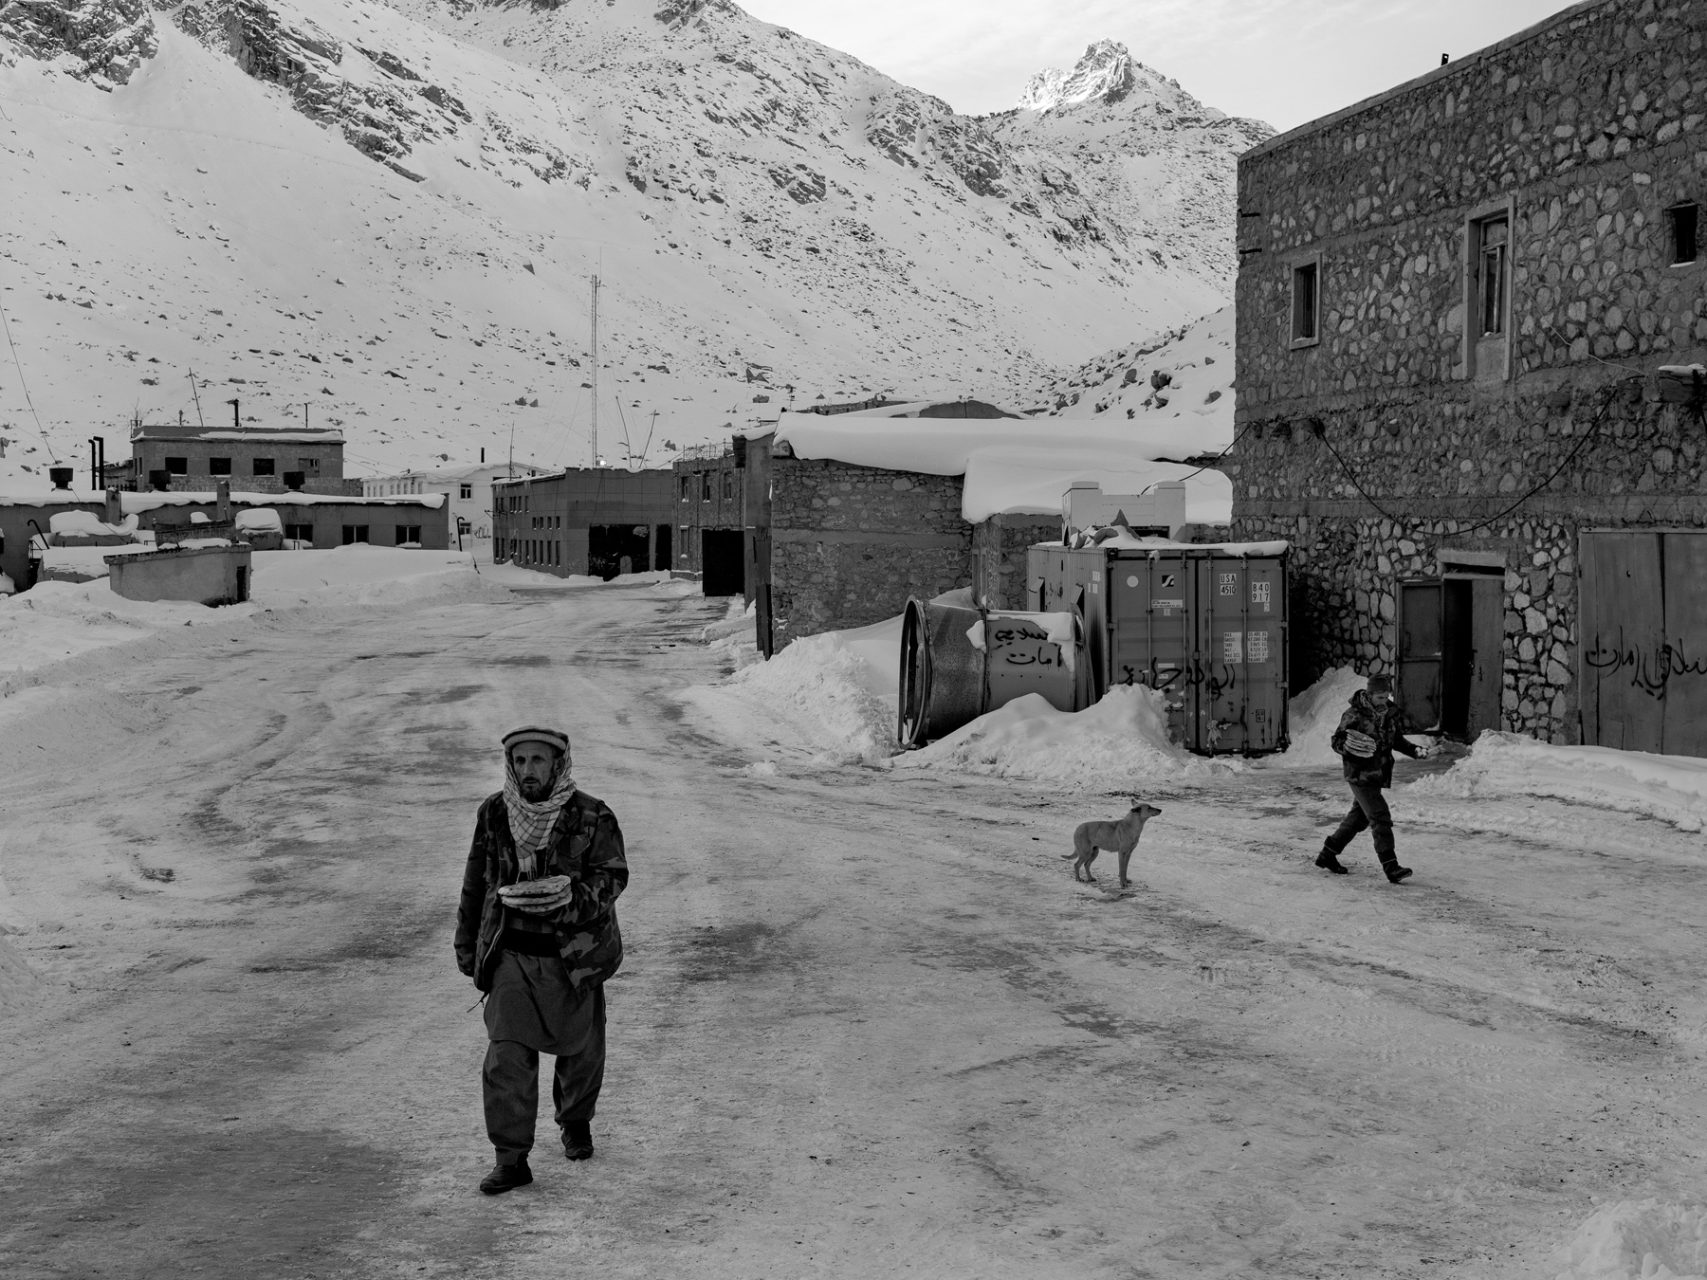 Workers at the maintenance village in Northern Salang, pass through the iced former Soviet base on 3600m altitude as they pick up their room's daily ration for breakfast. The village's stray dog called Max watches them passing by.